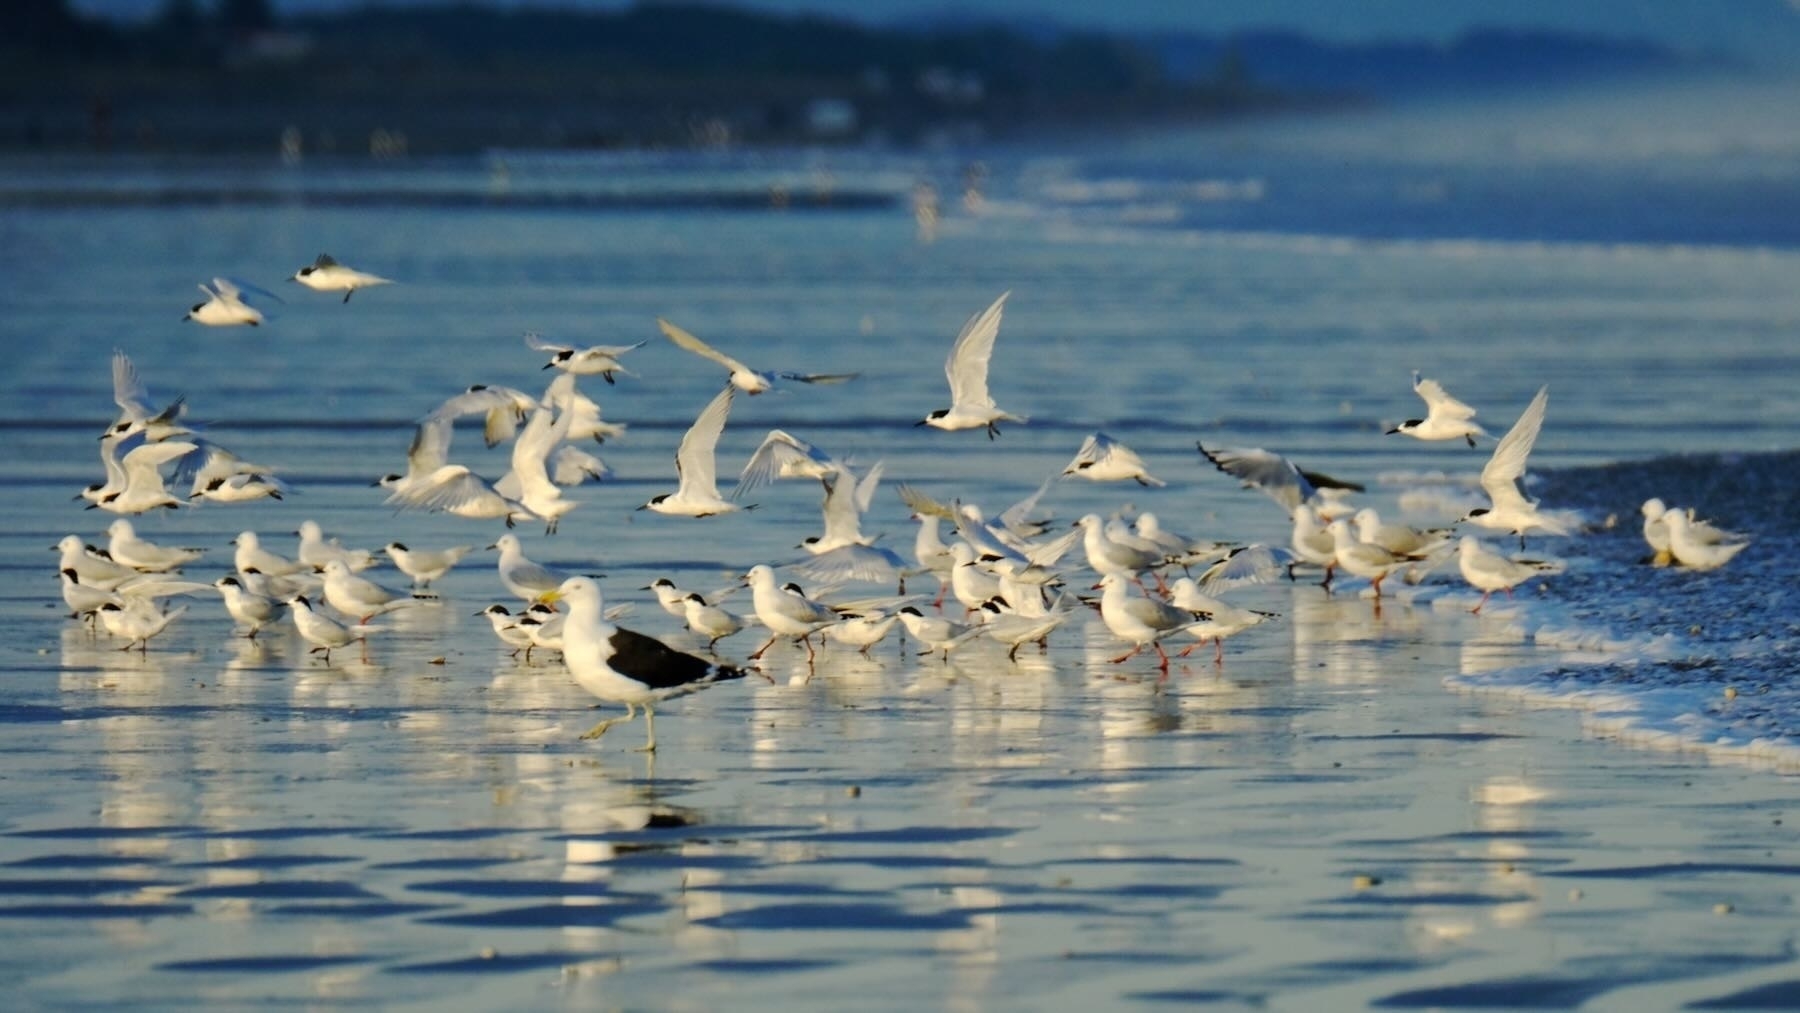 A flock of terns, some in flight, along with a Black-backed gull and some Red-billed gulls. 